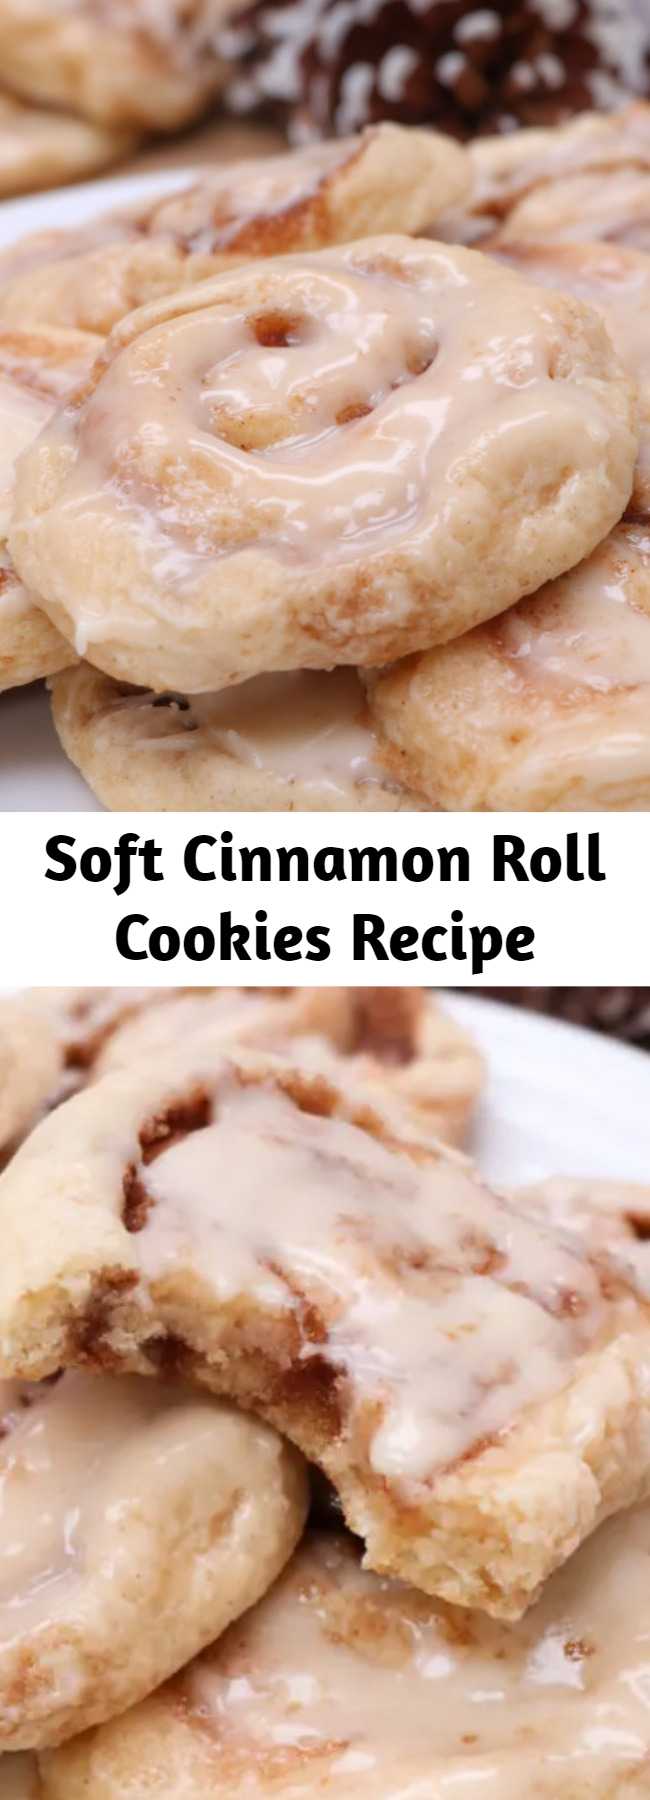 Soft Cinnamon Roll Cookies Recipe - A soft sugar cookie reminiscent of a cinnamon roll! Glazed with cream cheese glaze with swirls of cinnamon sugar. #cookies #cinnamonroll #soft #fluffy #desserts #homemade #chewy